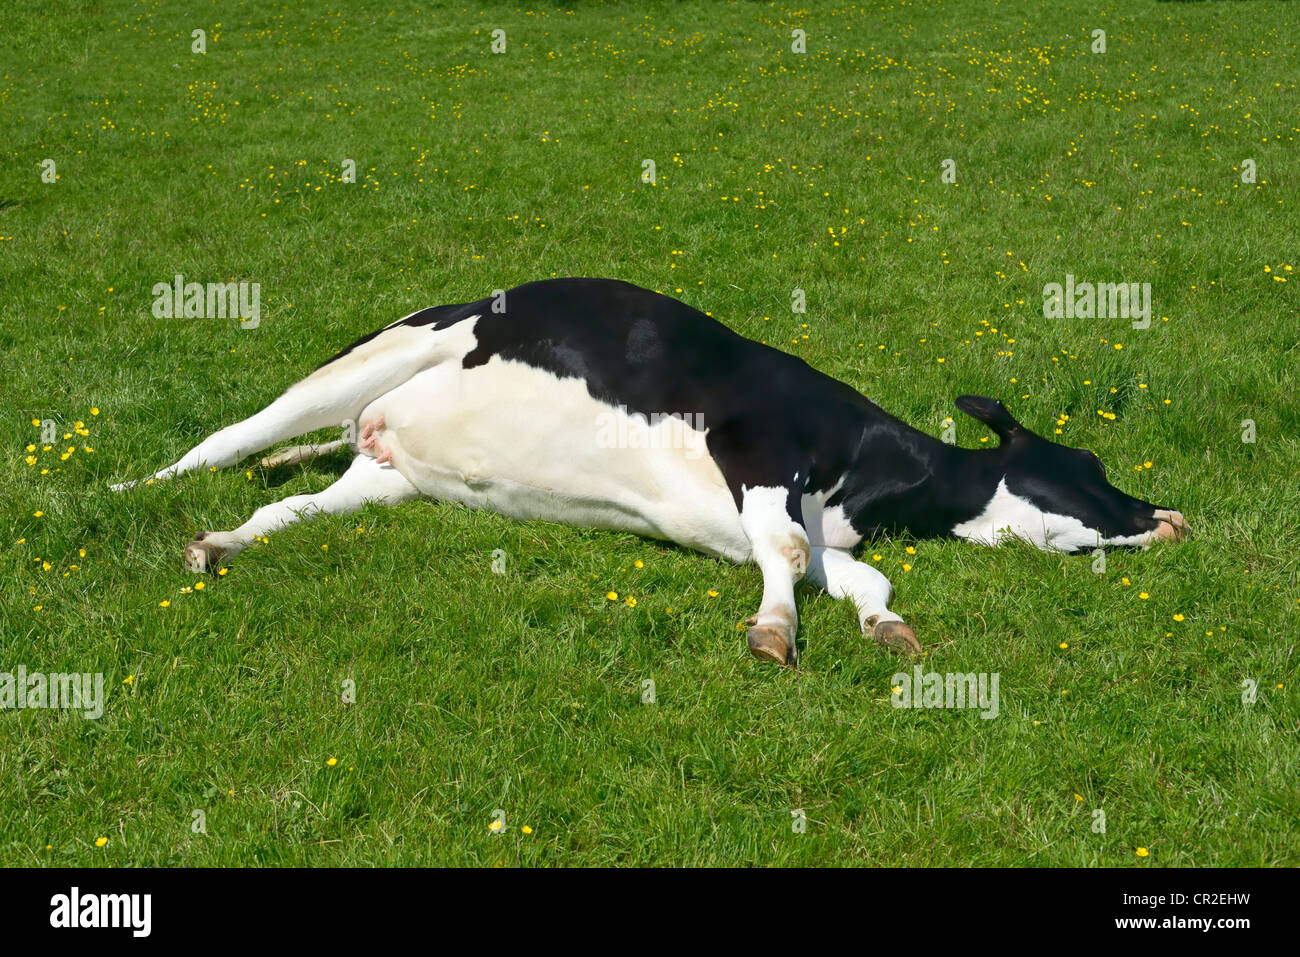 sleeping-cow-on-grass-with-buttercups-leighton-hall-yealand-conyers-CR2EHW.jpg